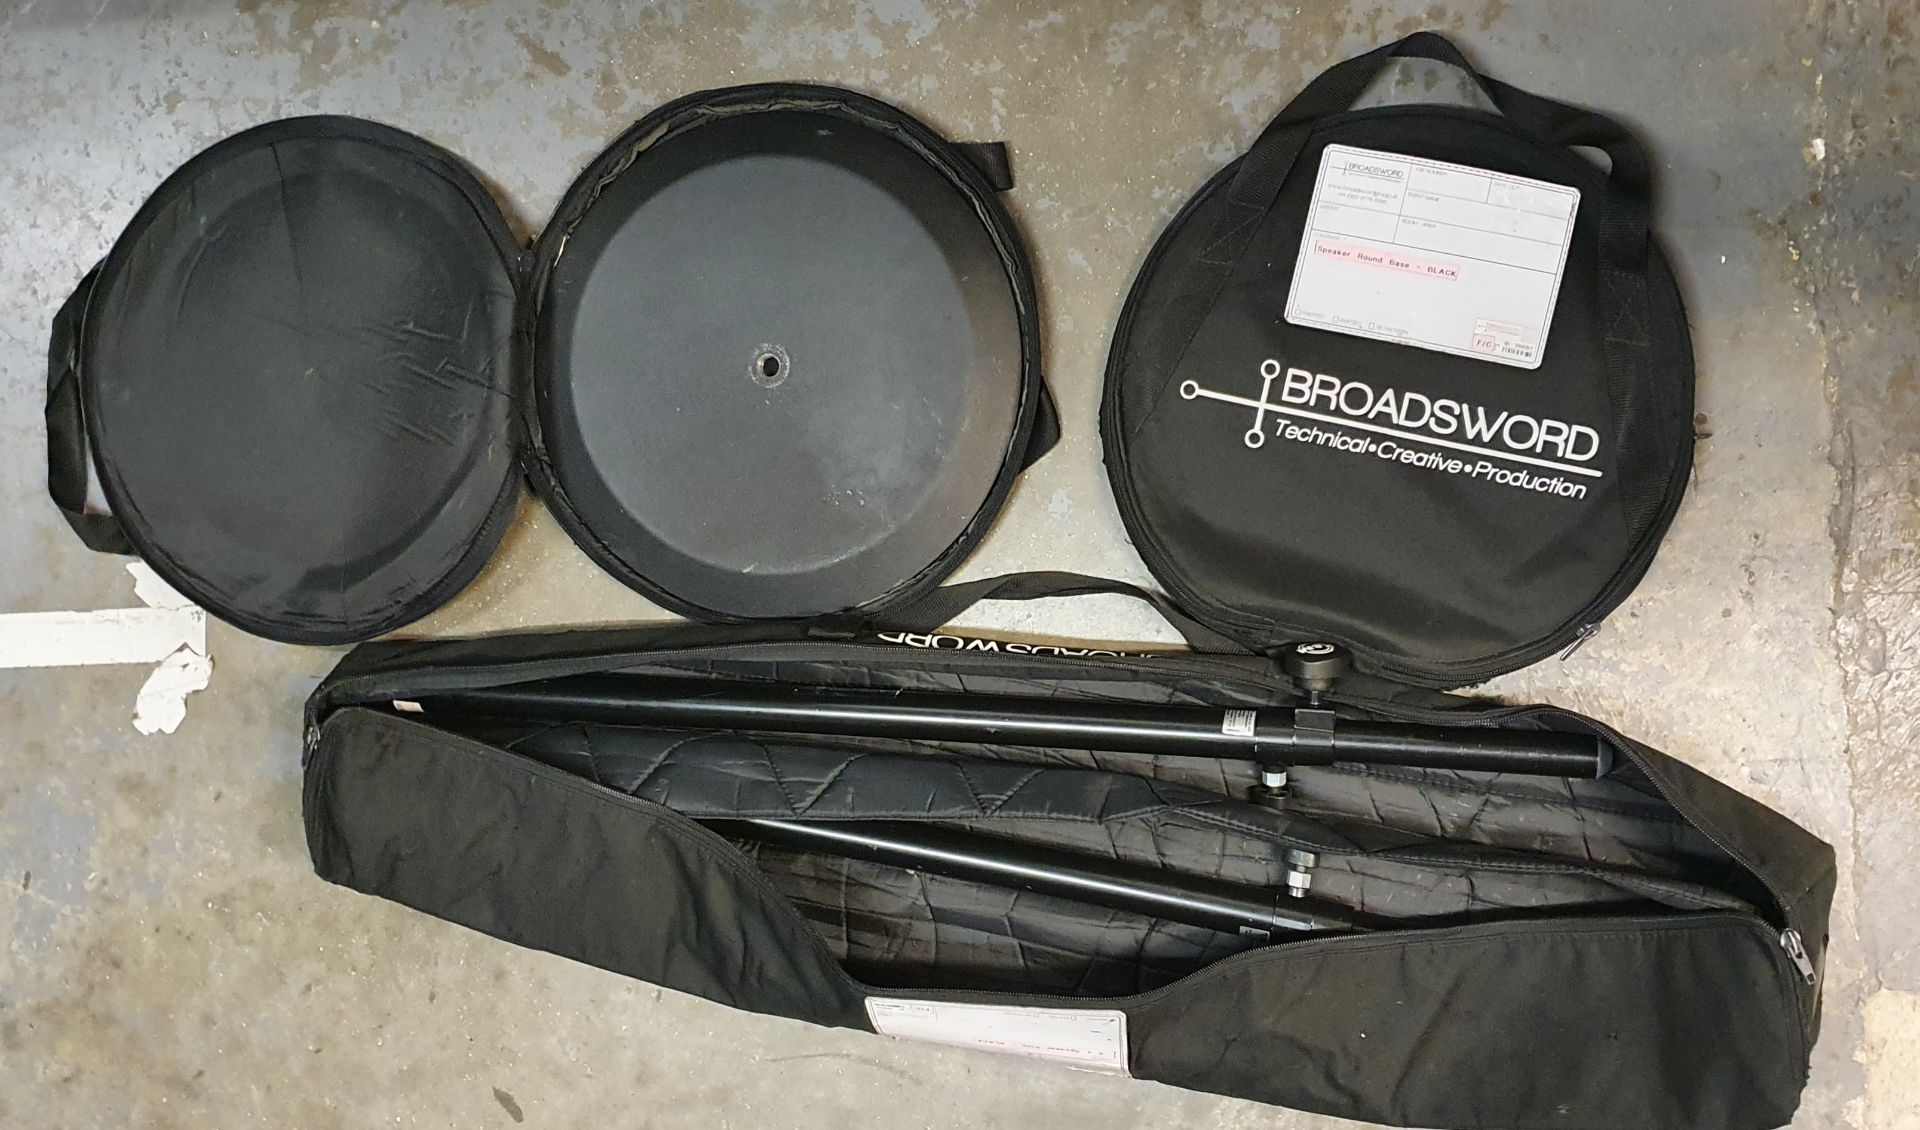 A Pair of K+M Black Speaker Round Base Stands comprising: 2 poles and 2 bases with carry bags. - Image 2 of 2